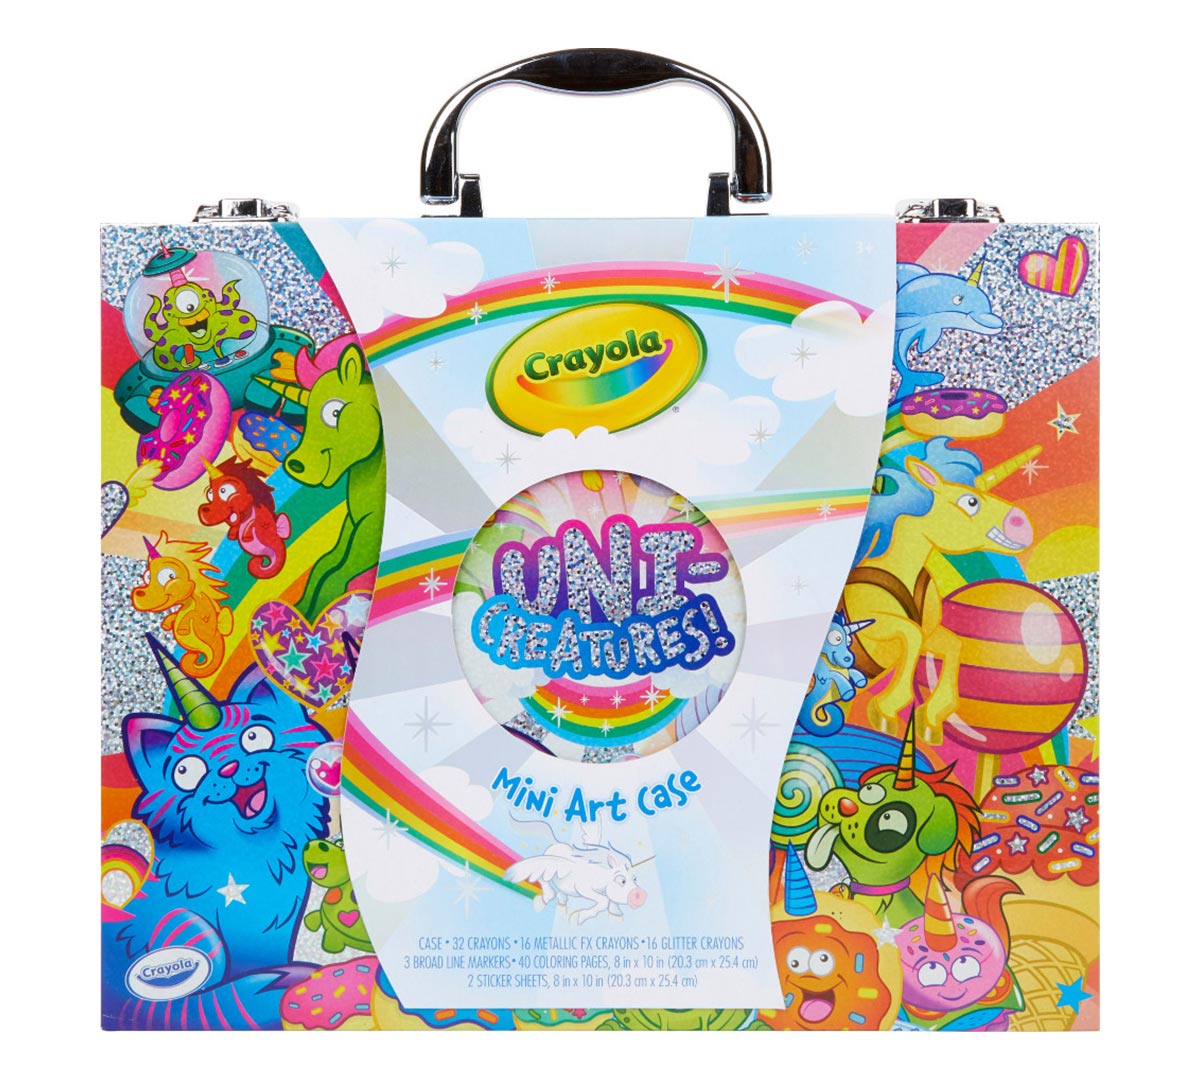 Crayola Silly Scents Mini Inspiration Art Case Coloring Set, Gift